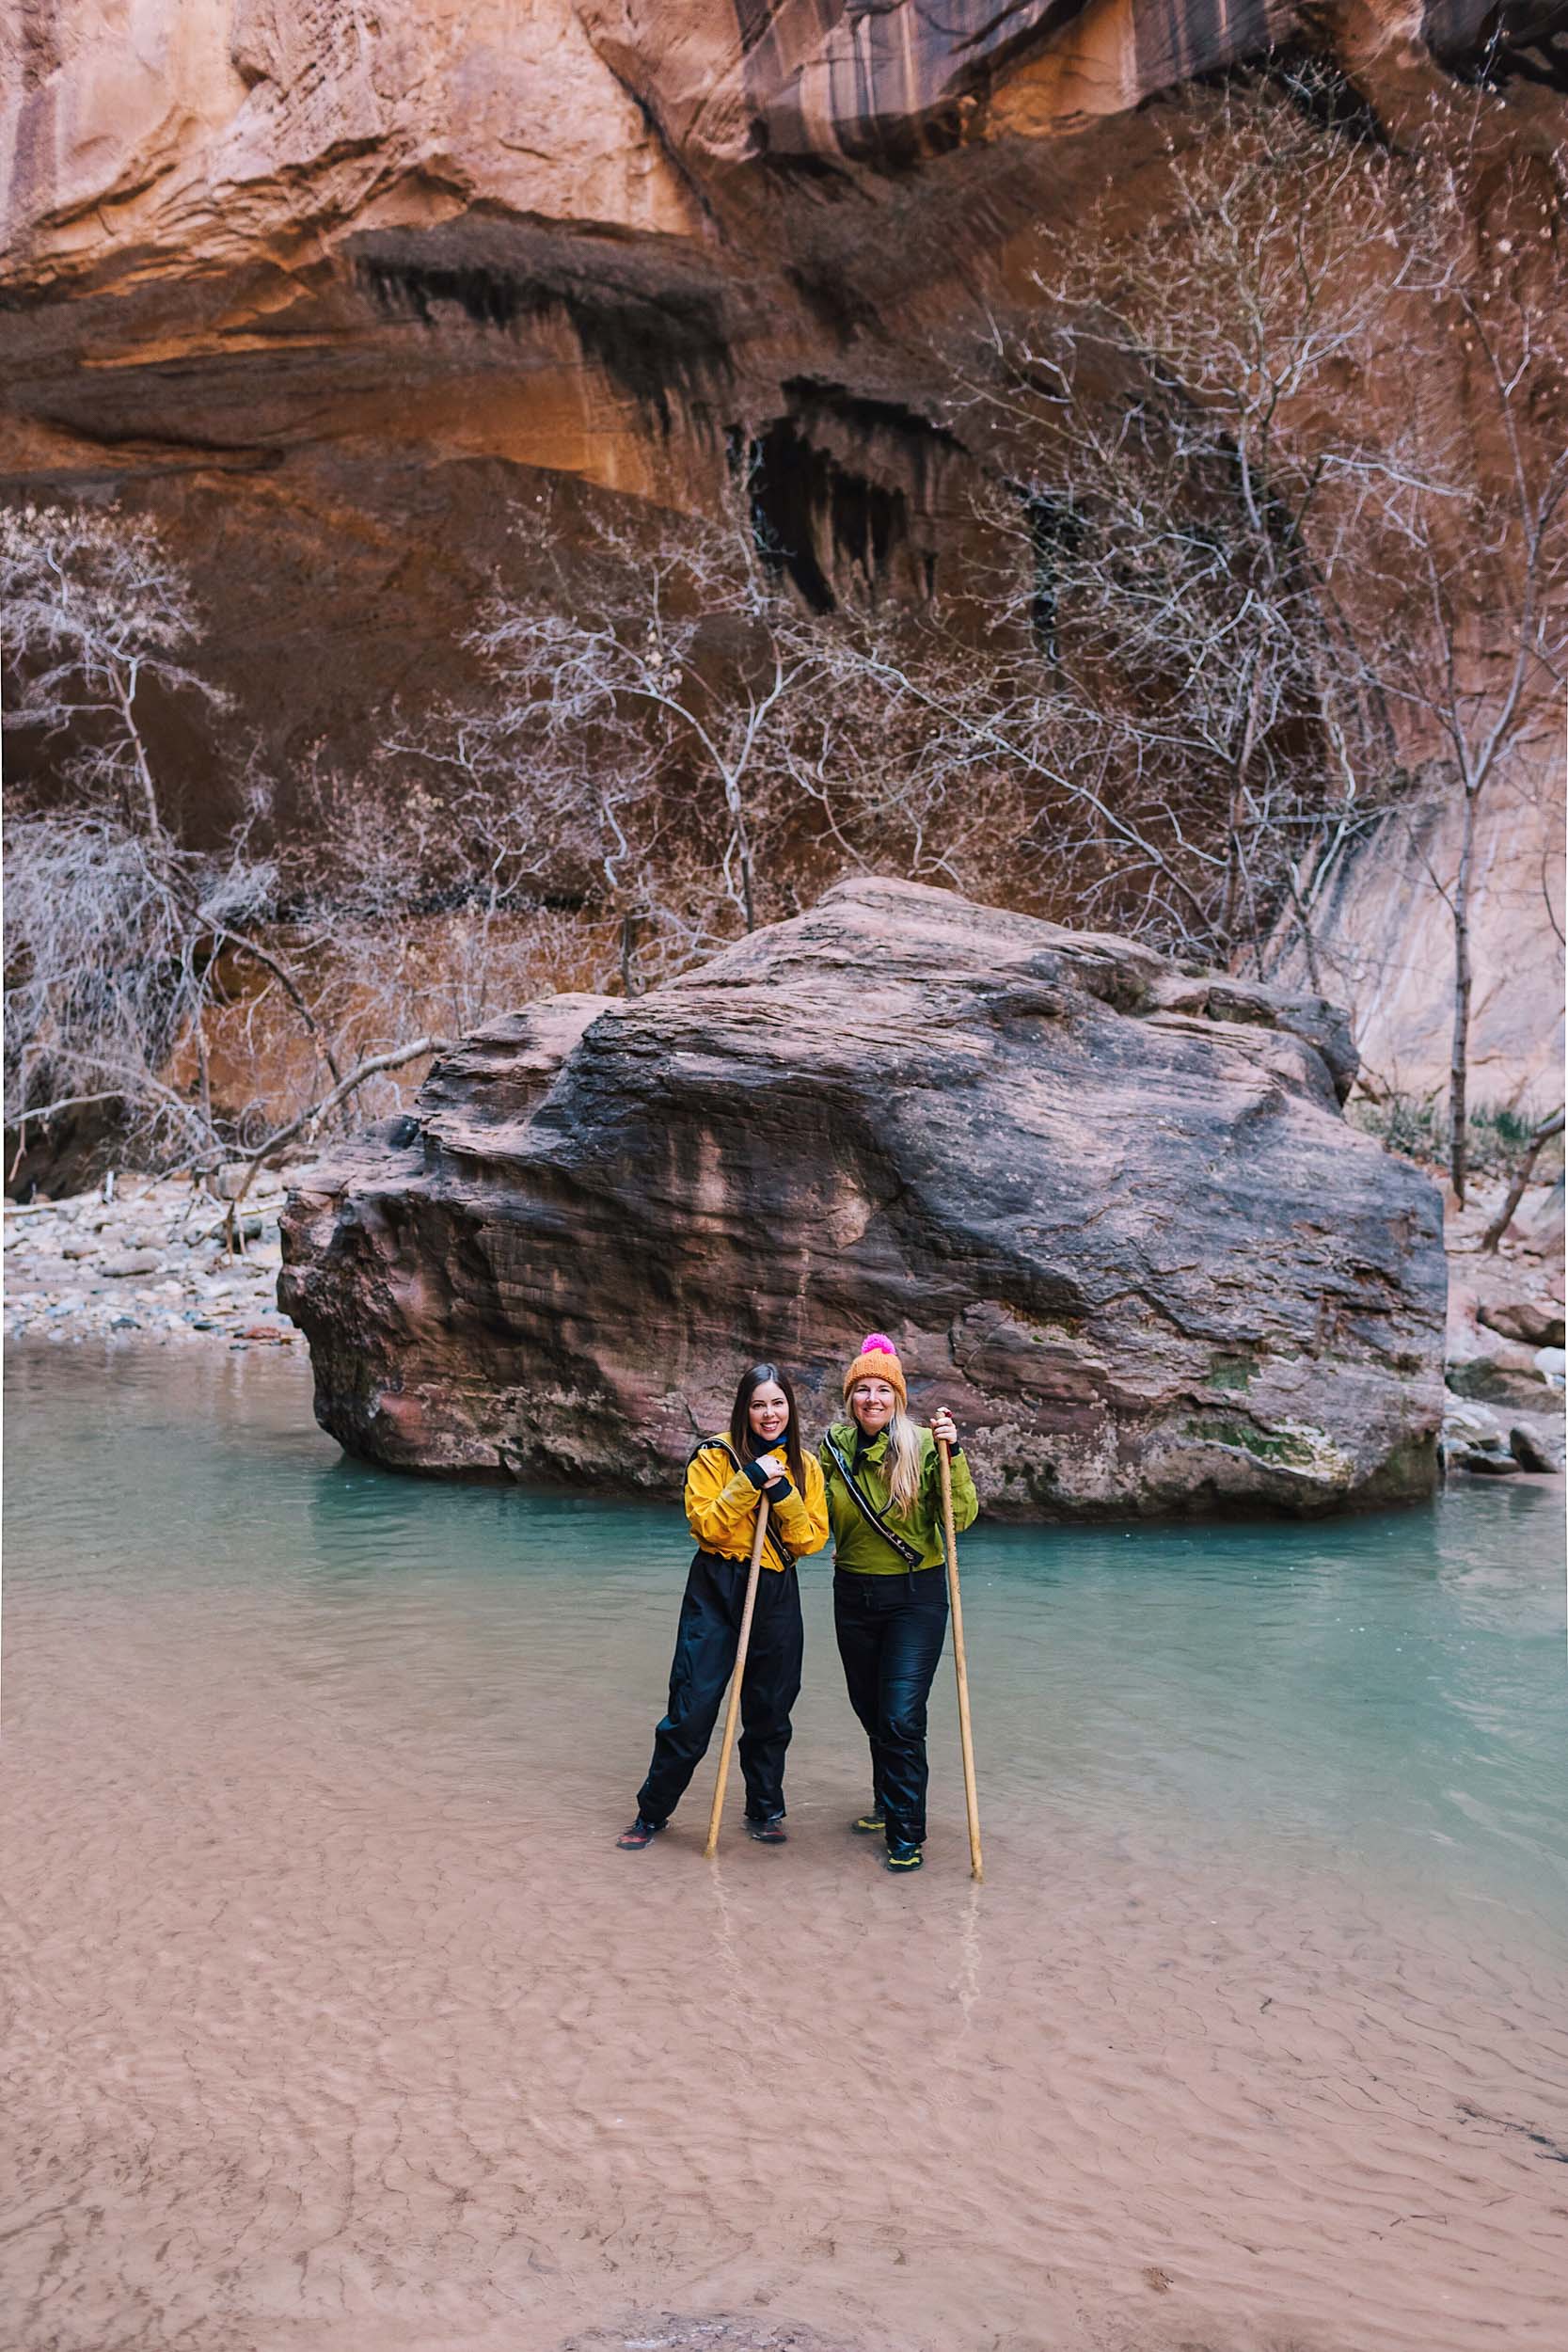 Hiking the Narrows at Zion in winter - perfect (as long as you have waterproof gear!)